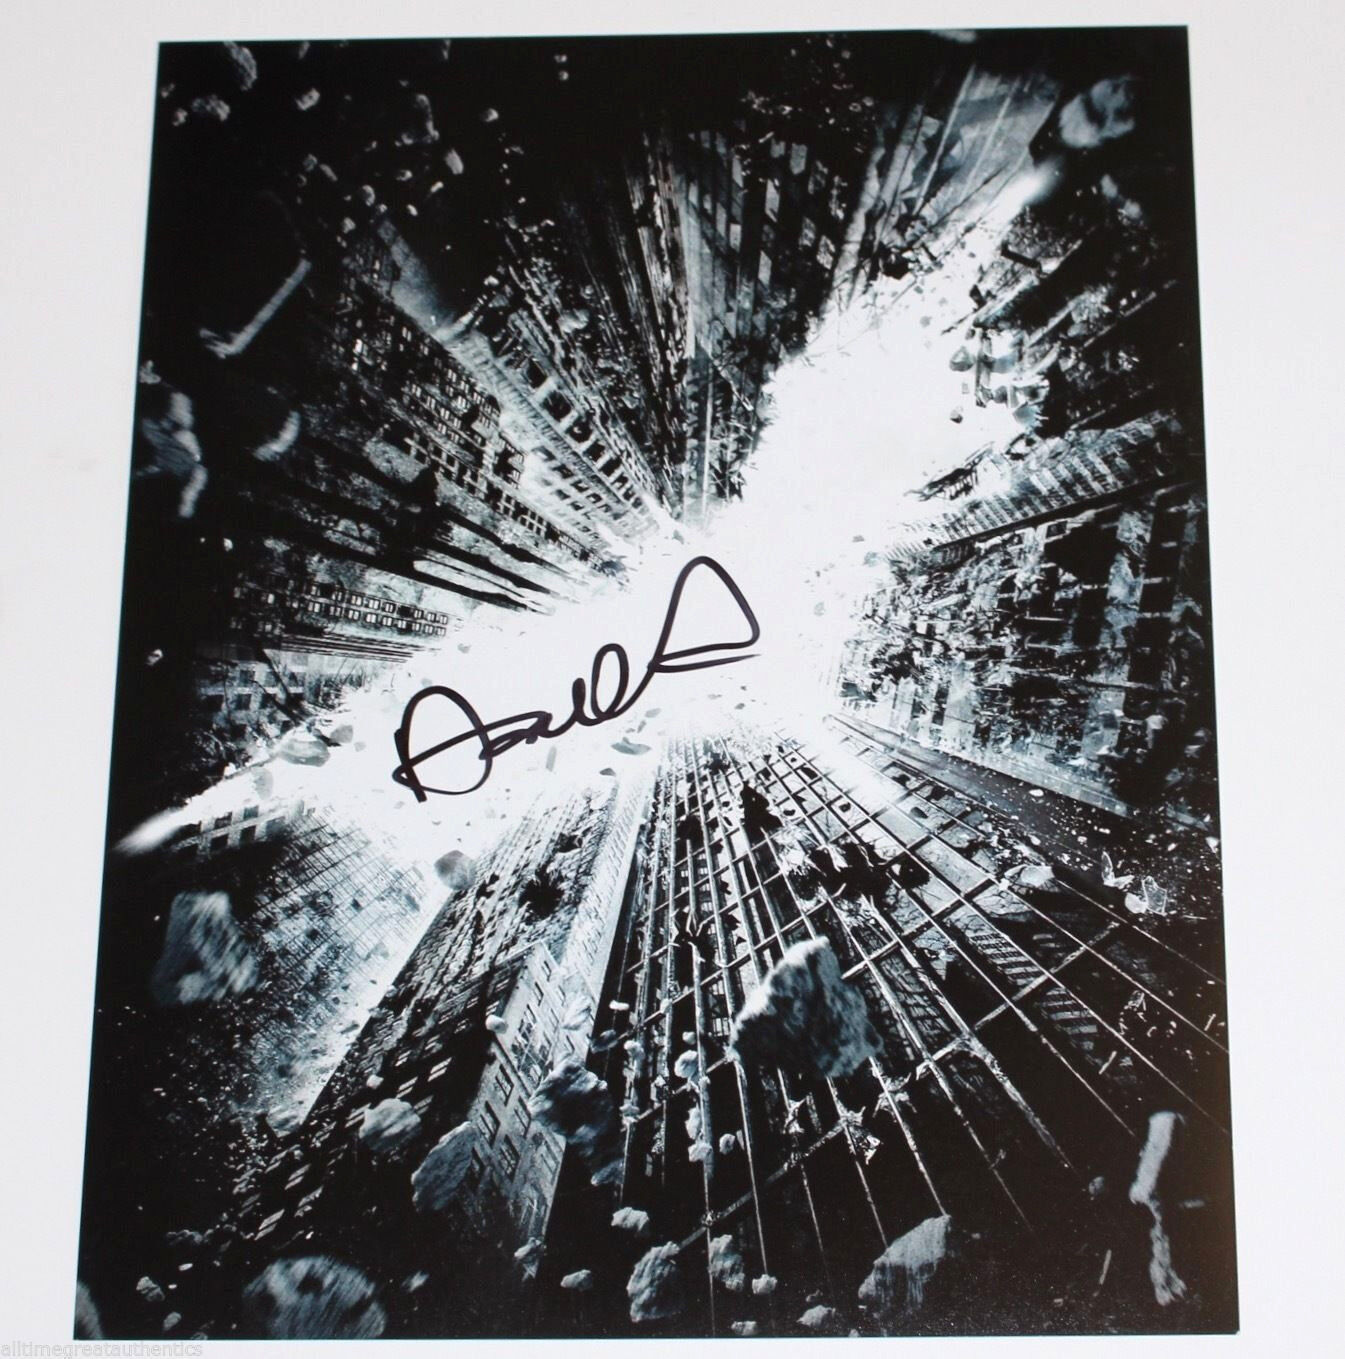 DAVID S. GOYER SIGNED AUTHENTIC 'THE DARK KNIGHT RISES' 11X14 Photo Poster painting w/COA WRITER